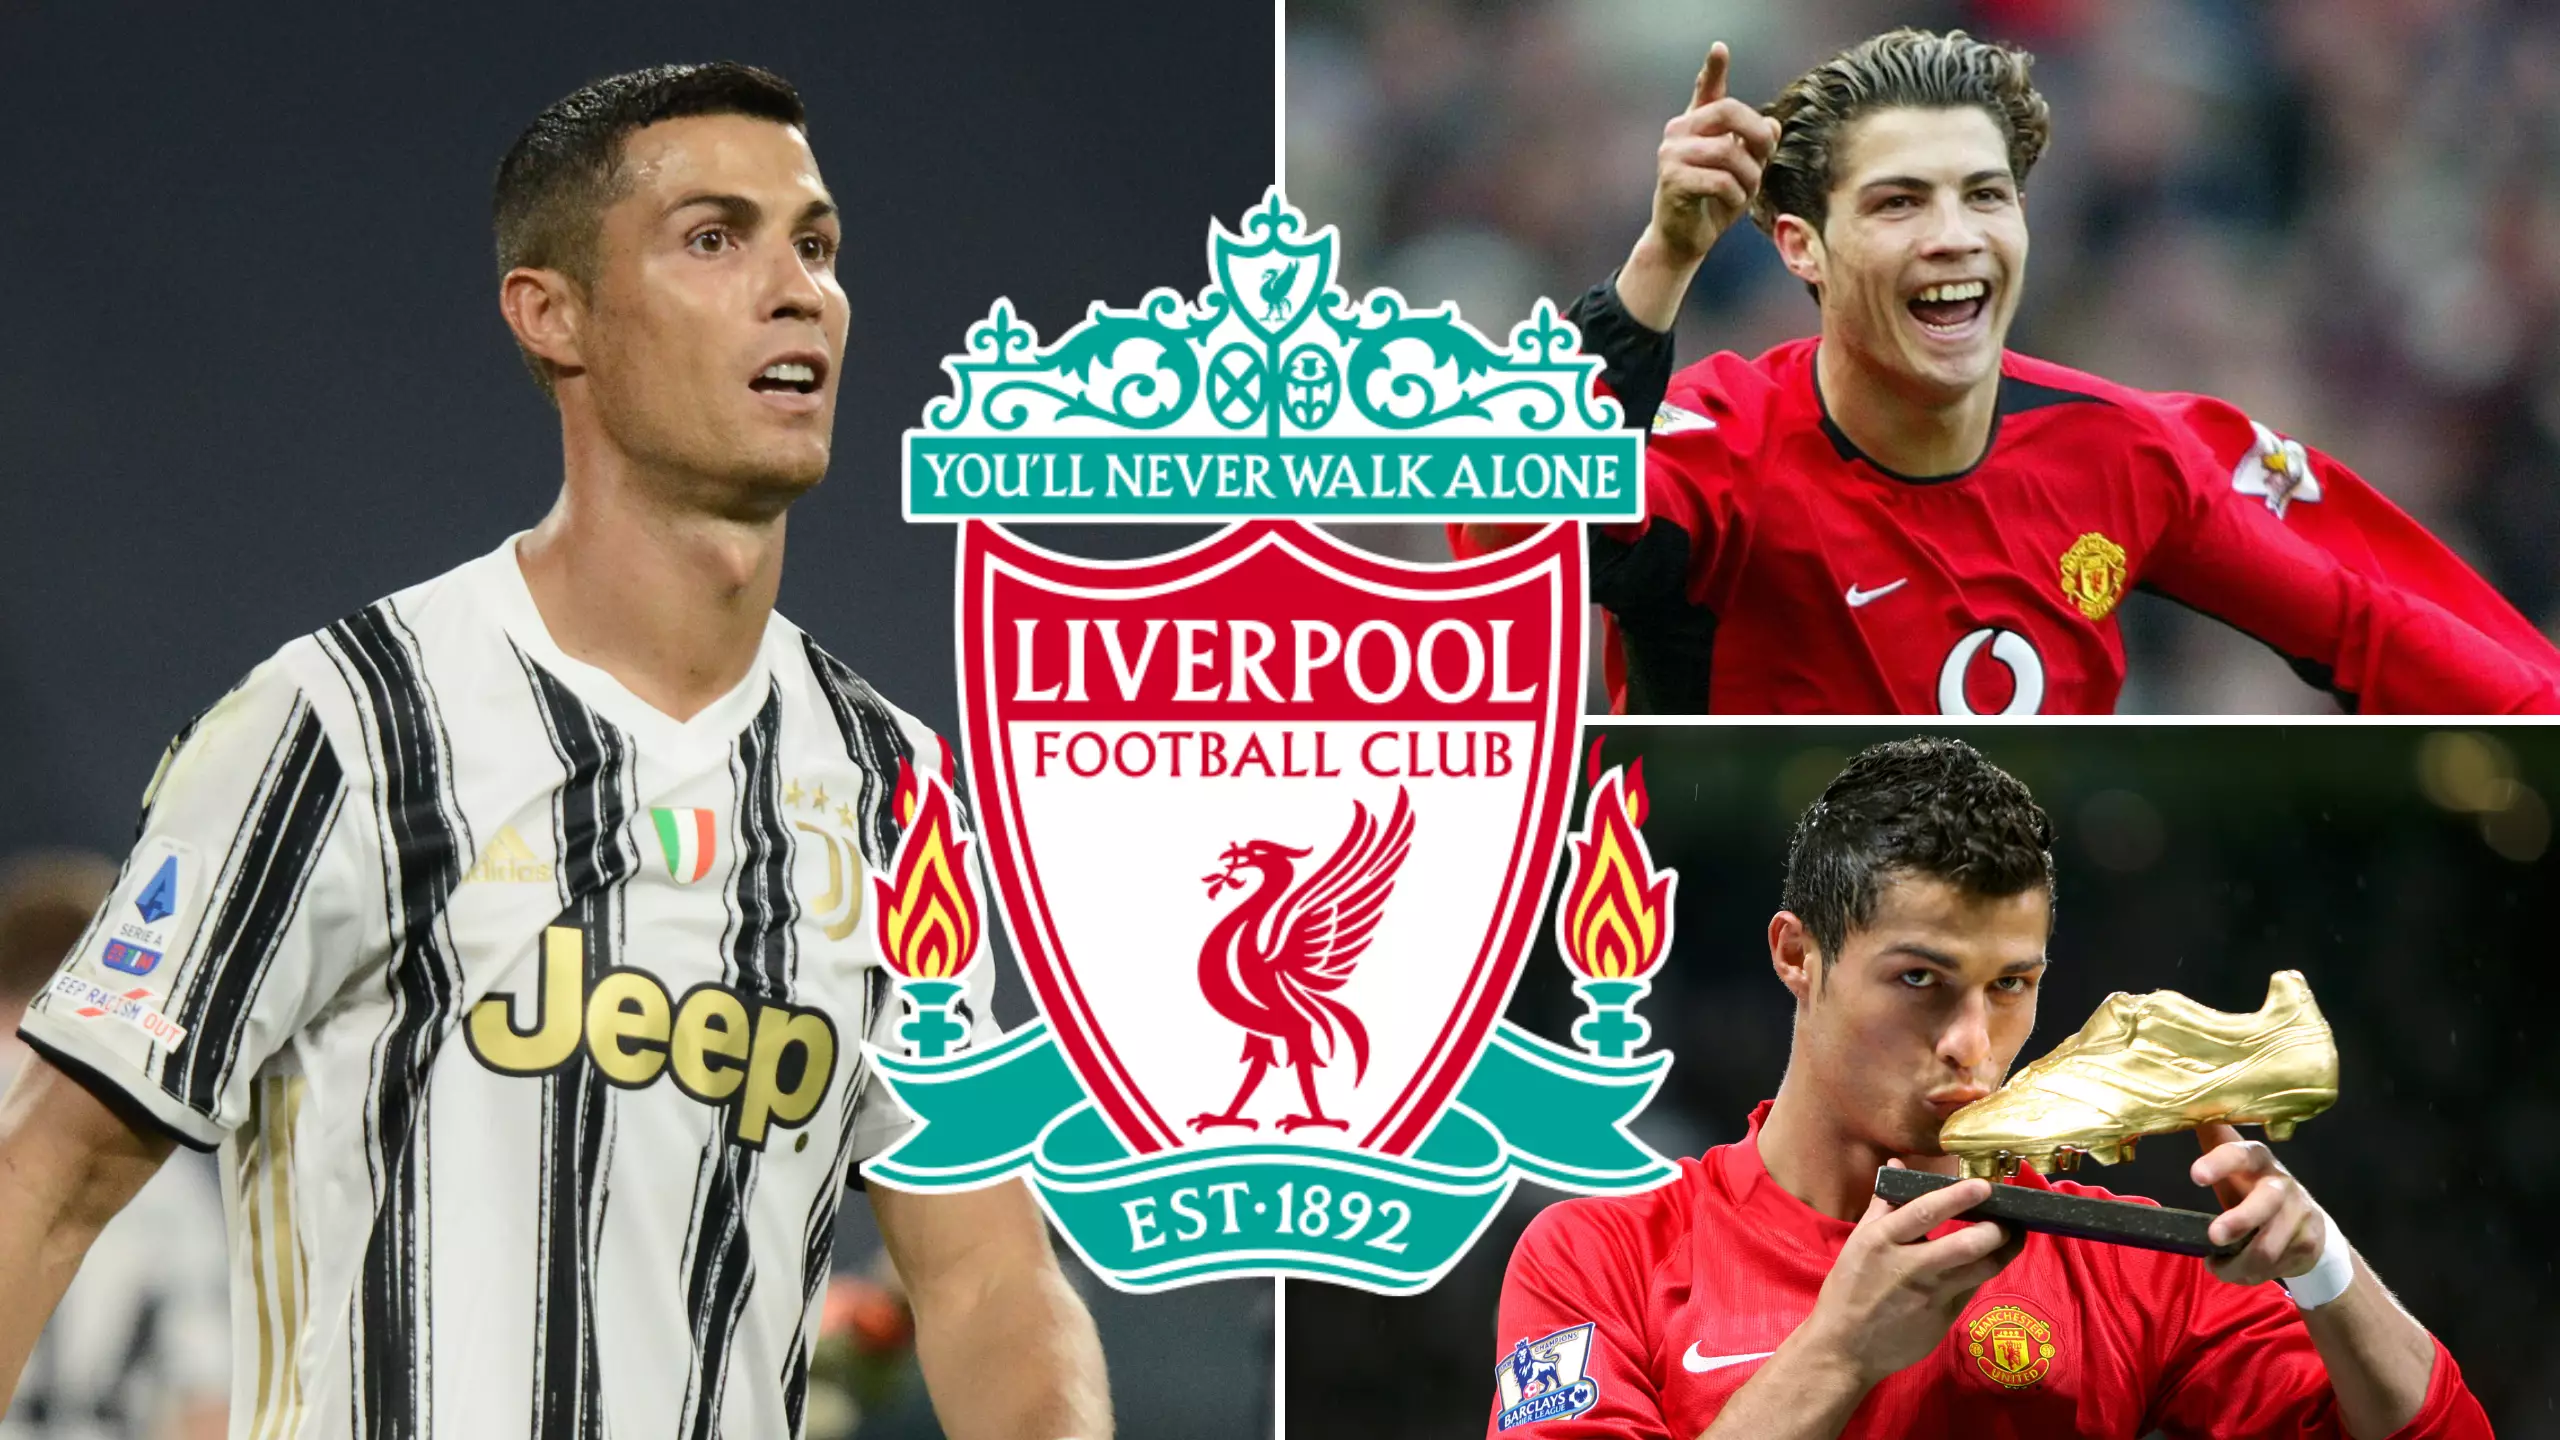 Liverpool's Reaction To Missing Out On £4 Million Cristiano Ronaldo Deal Is Absolutely Priceless